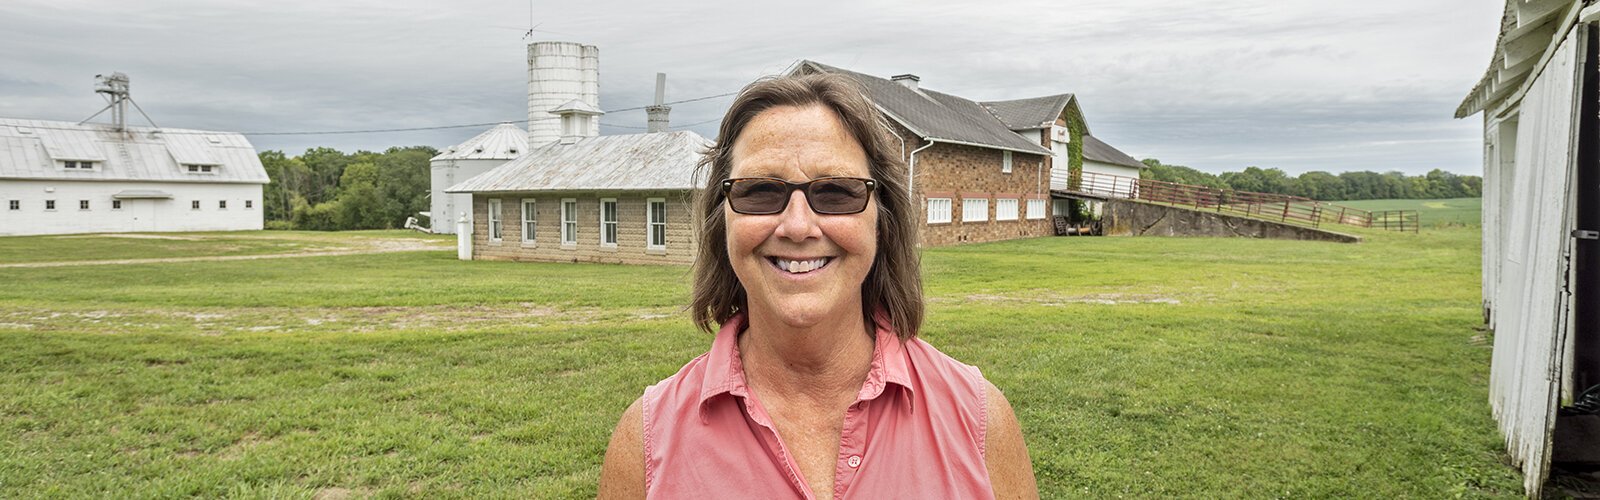 Krista Magaw, executive director of the Tecumseh Land Trust, which was created to save Whitehall Farm from development.